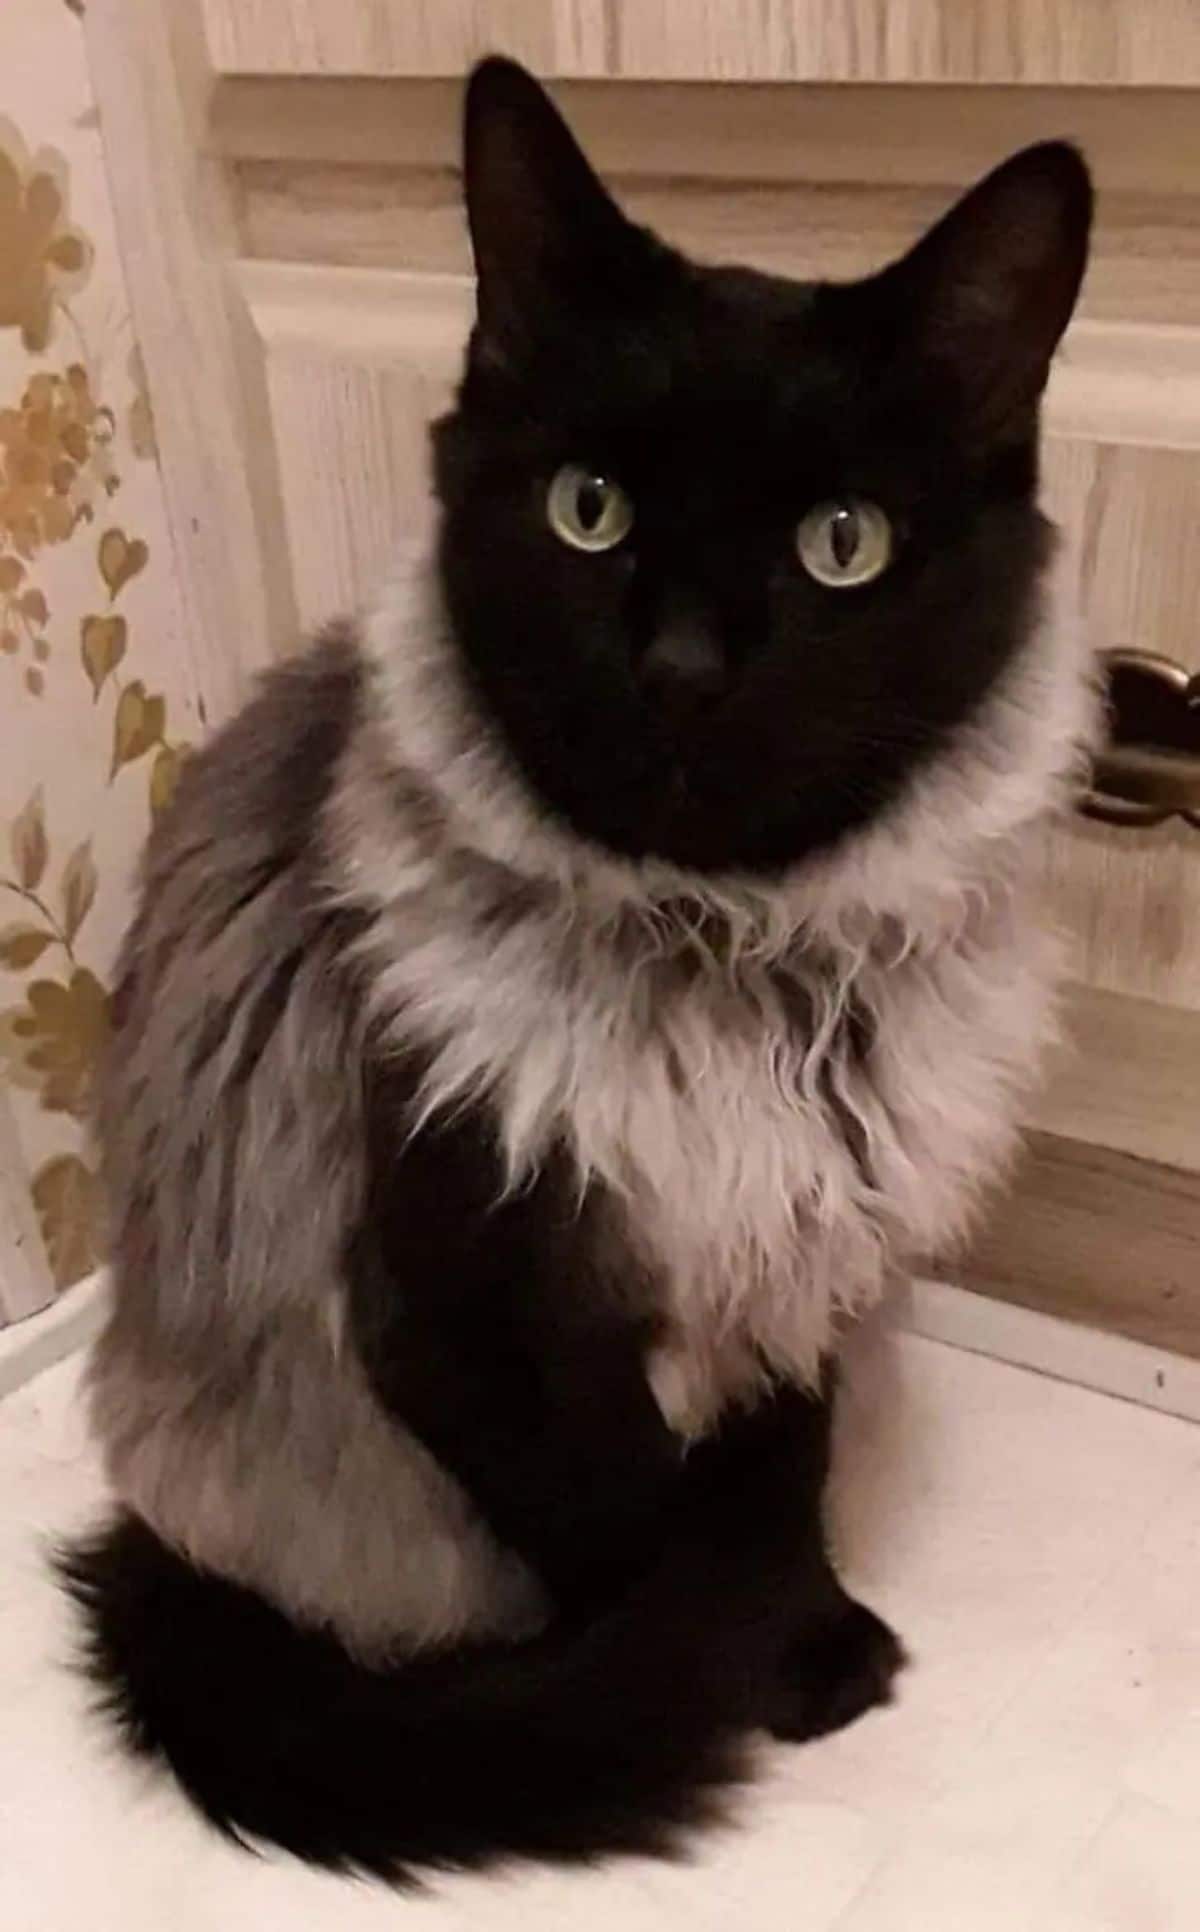 fluffy grey and white cat sitting with a black face and black front legs